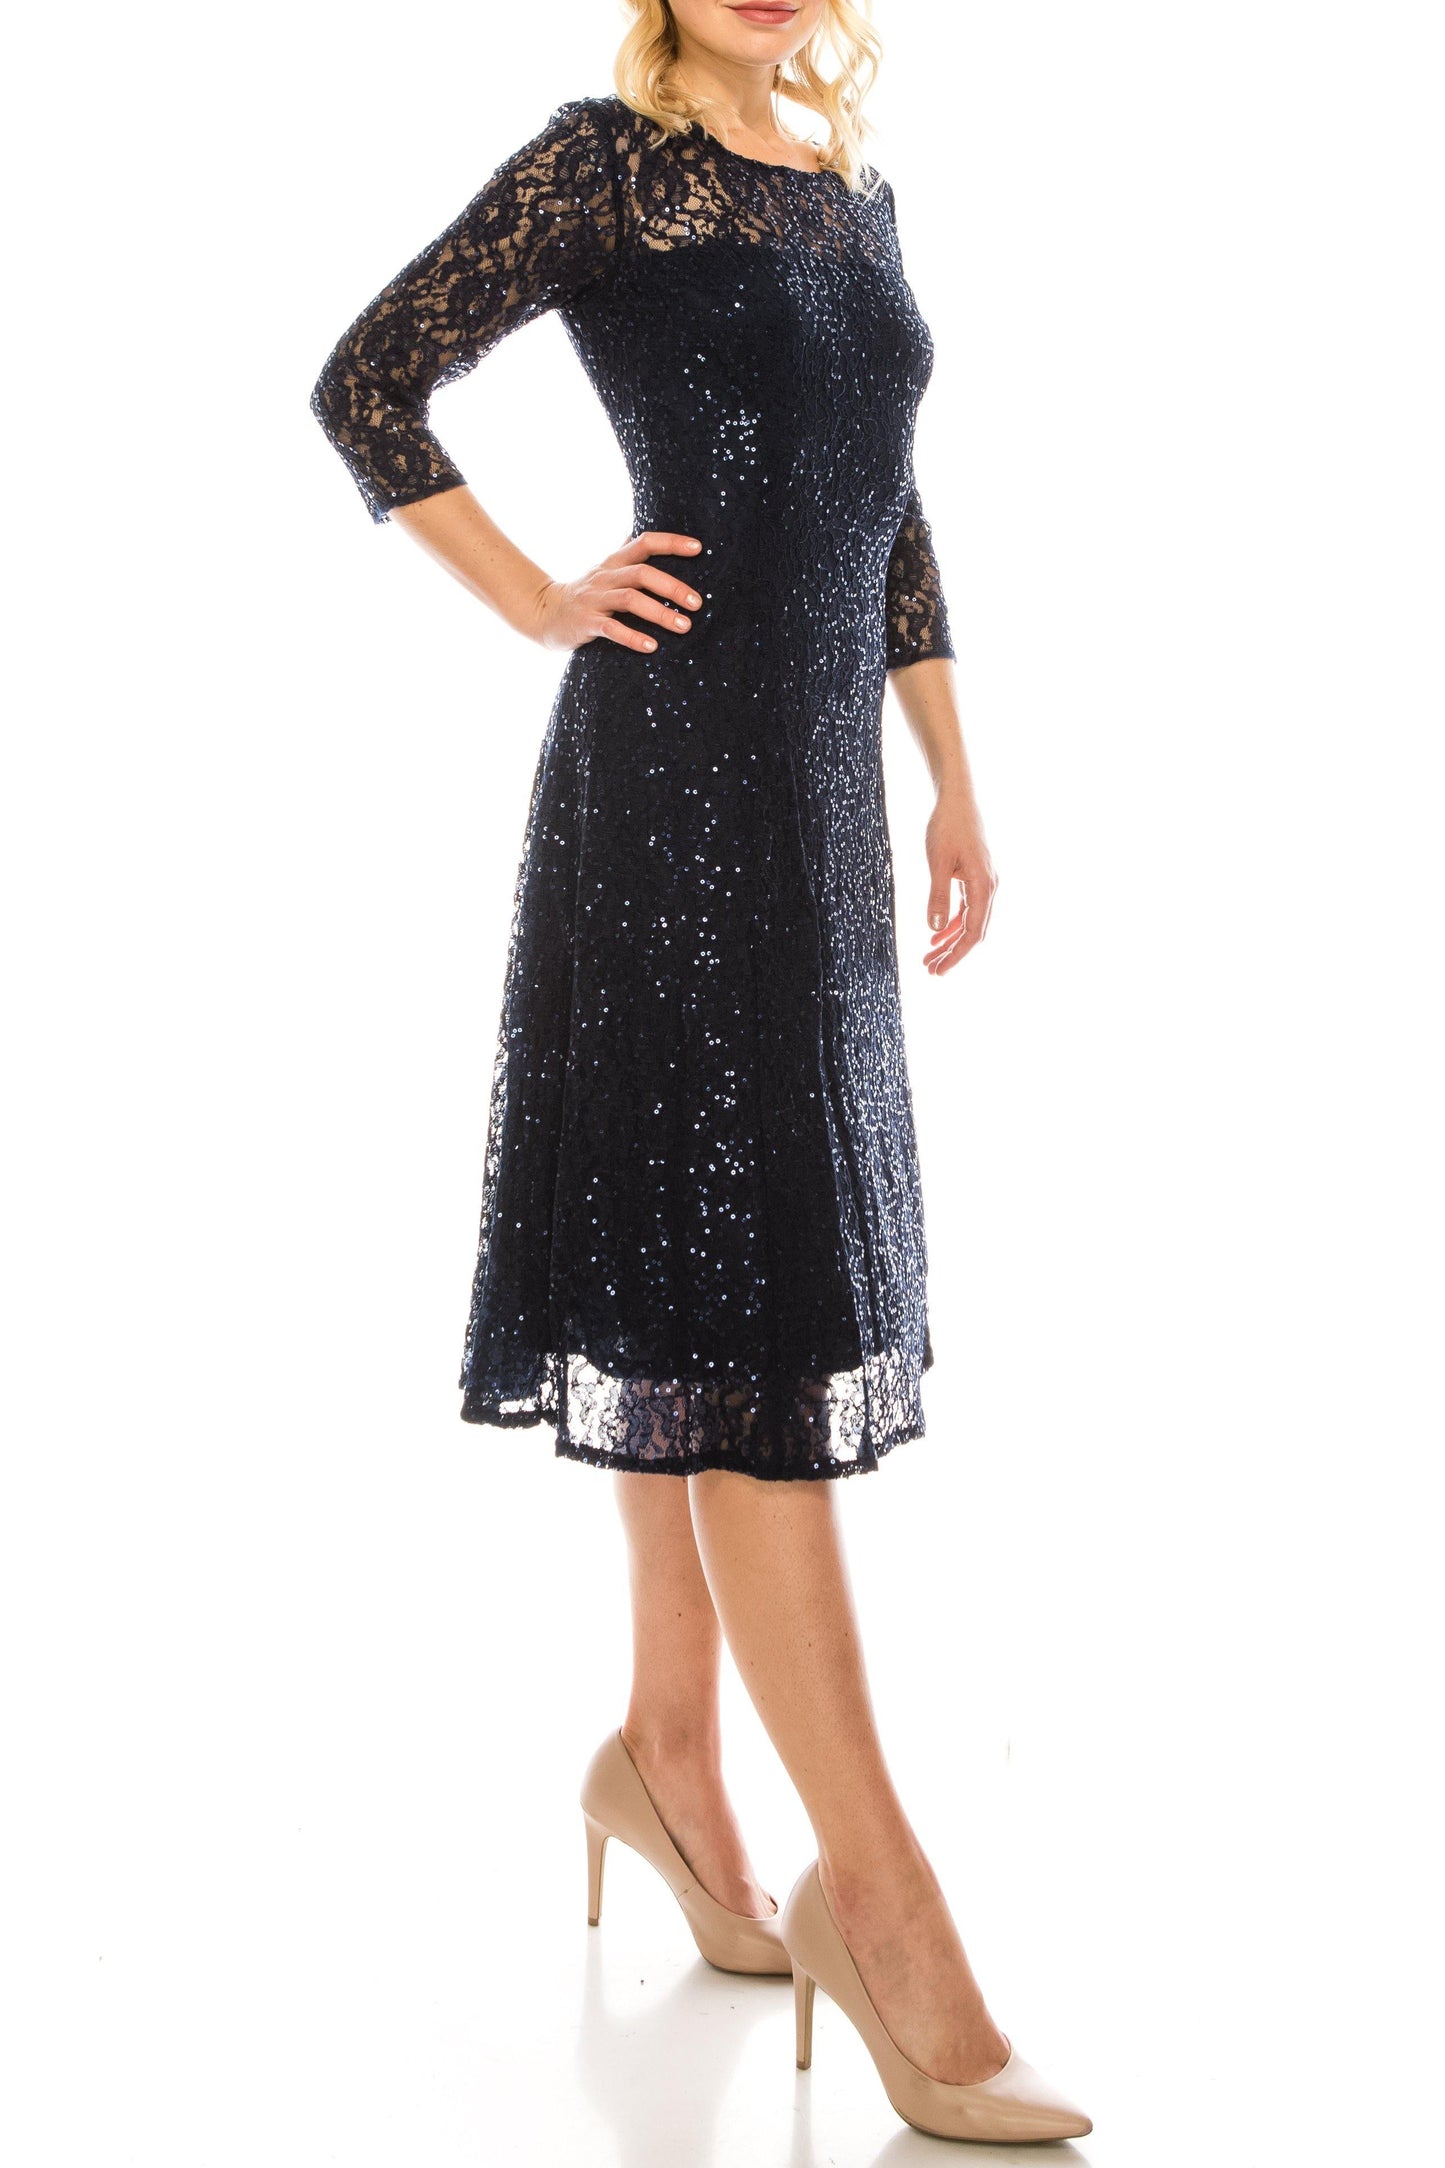 SL Fashions Short Sequined Lace Evening Dress 9119133 - The Dress Outlet